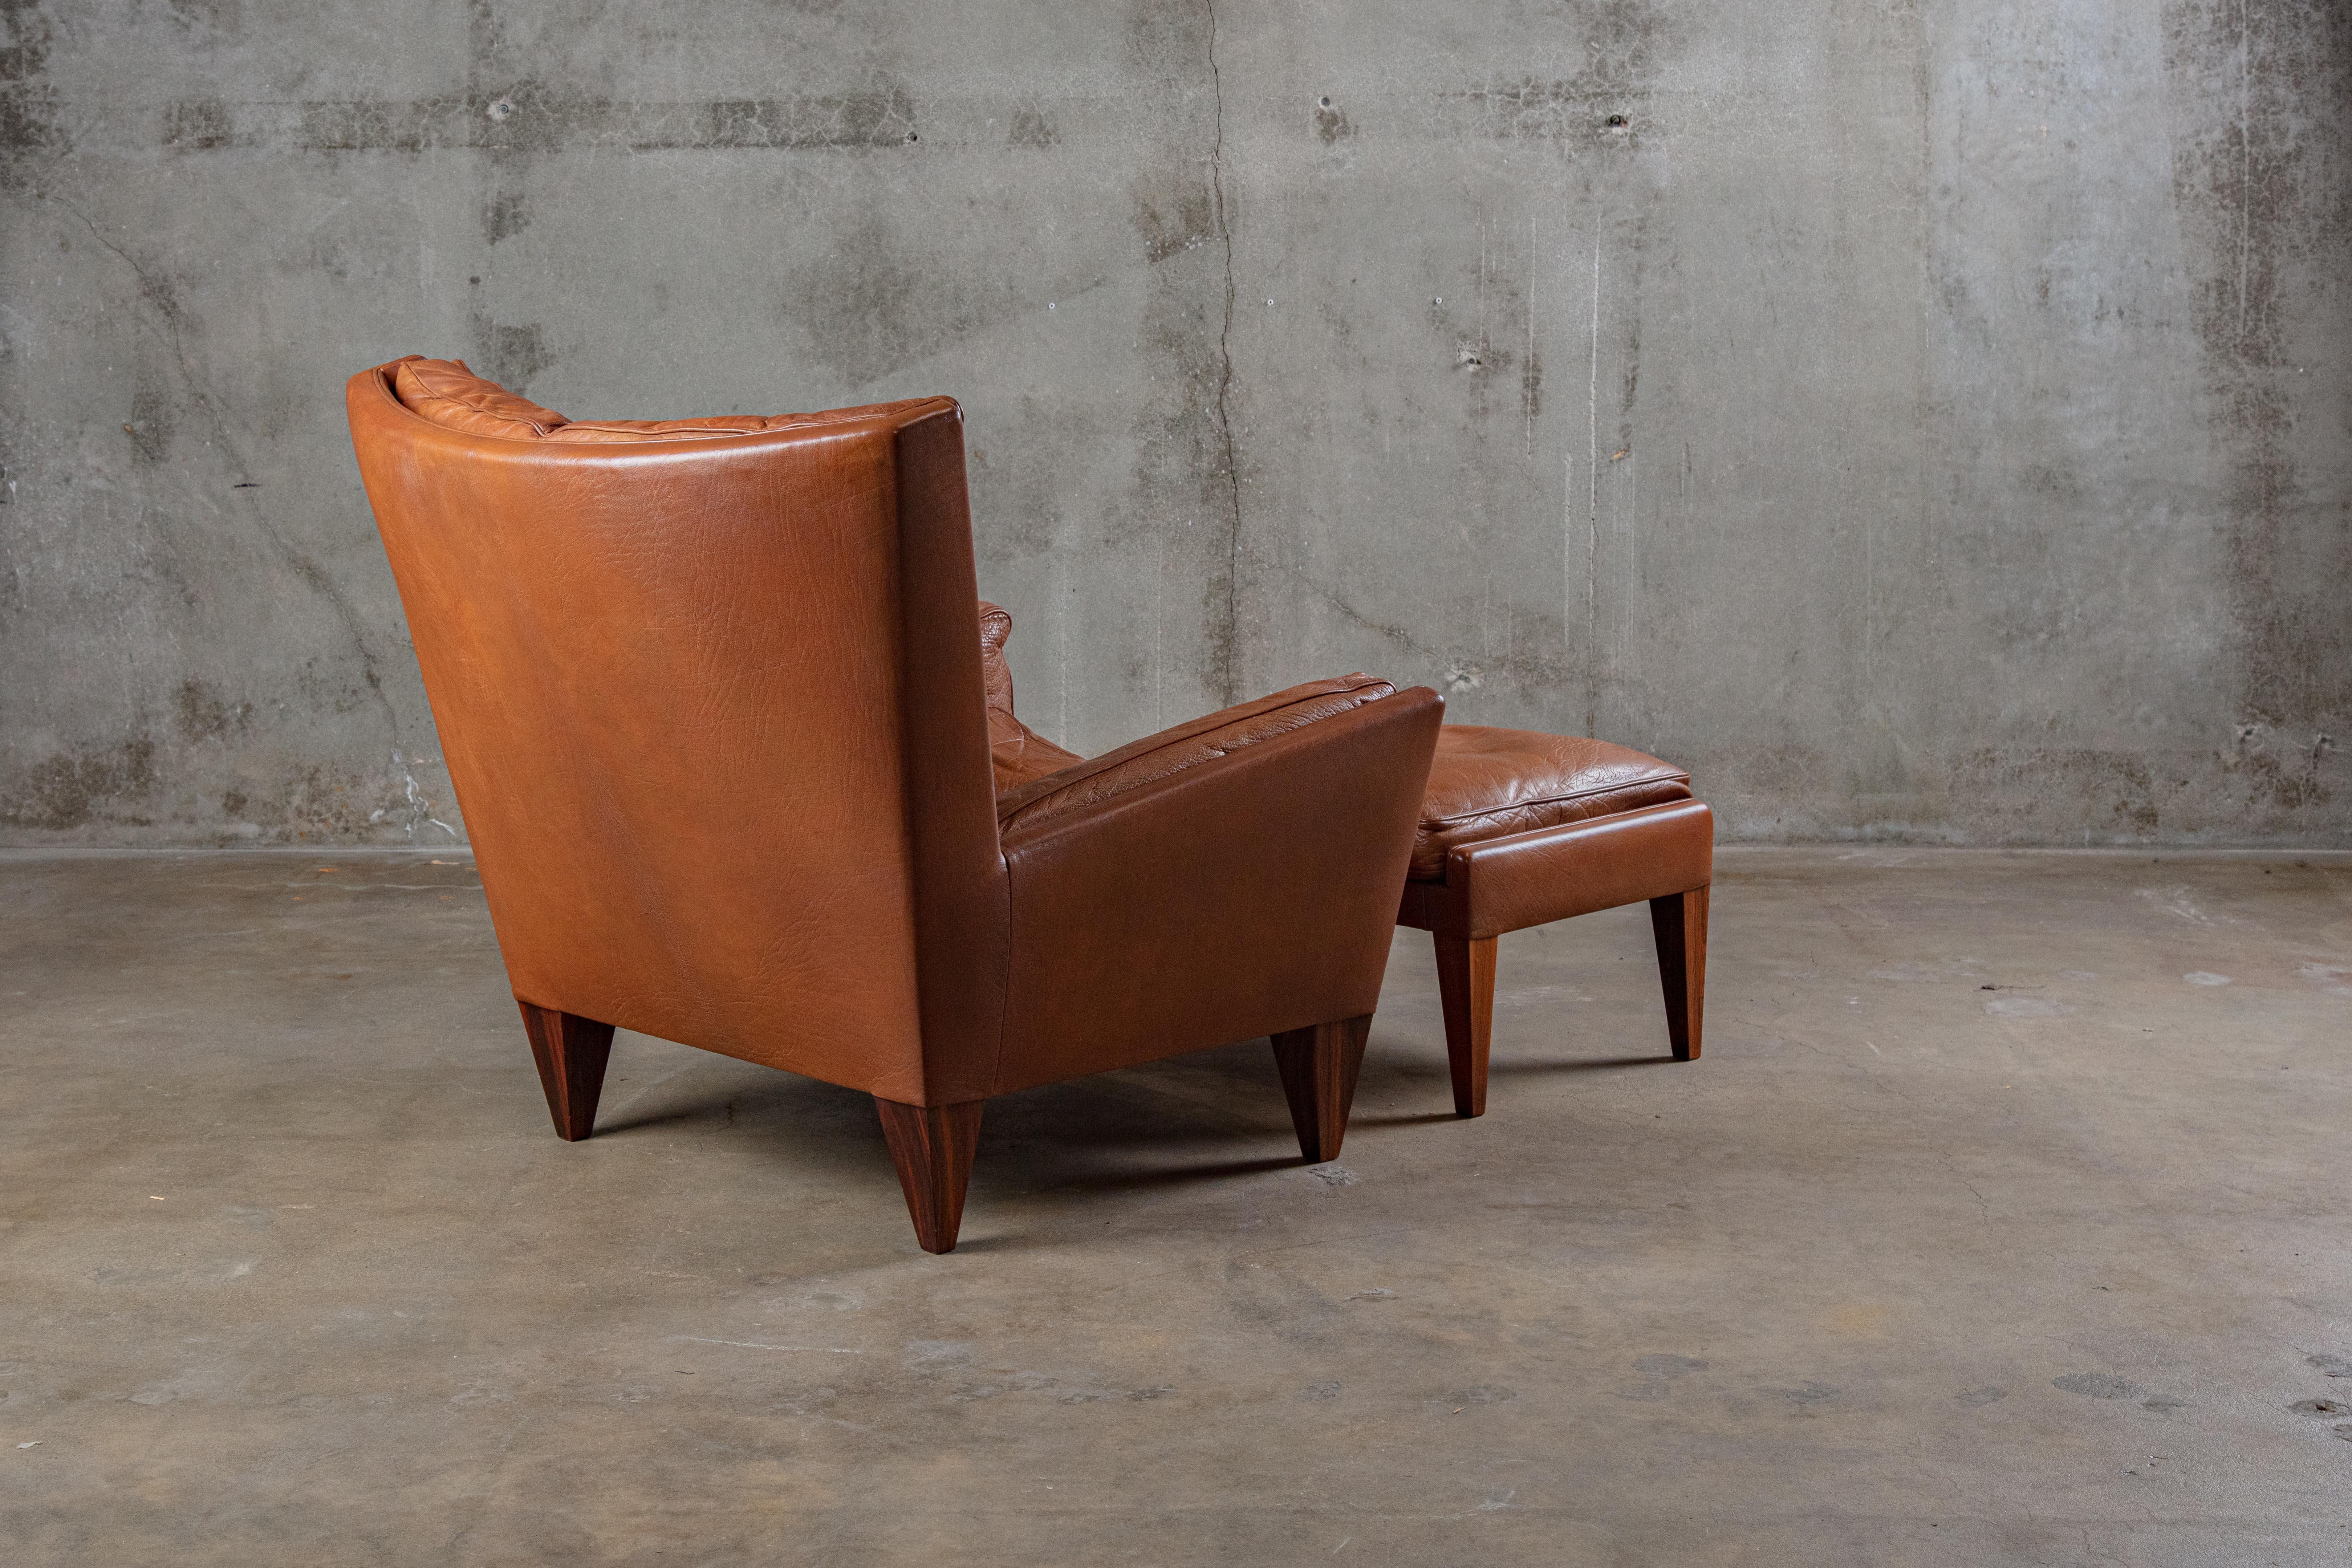 Denmark: Illum Wikkelso lounge chair and ottoman upholstered in brown leather, all original, 1950s

Ottoman: 13